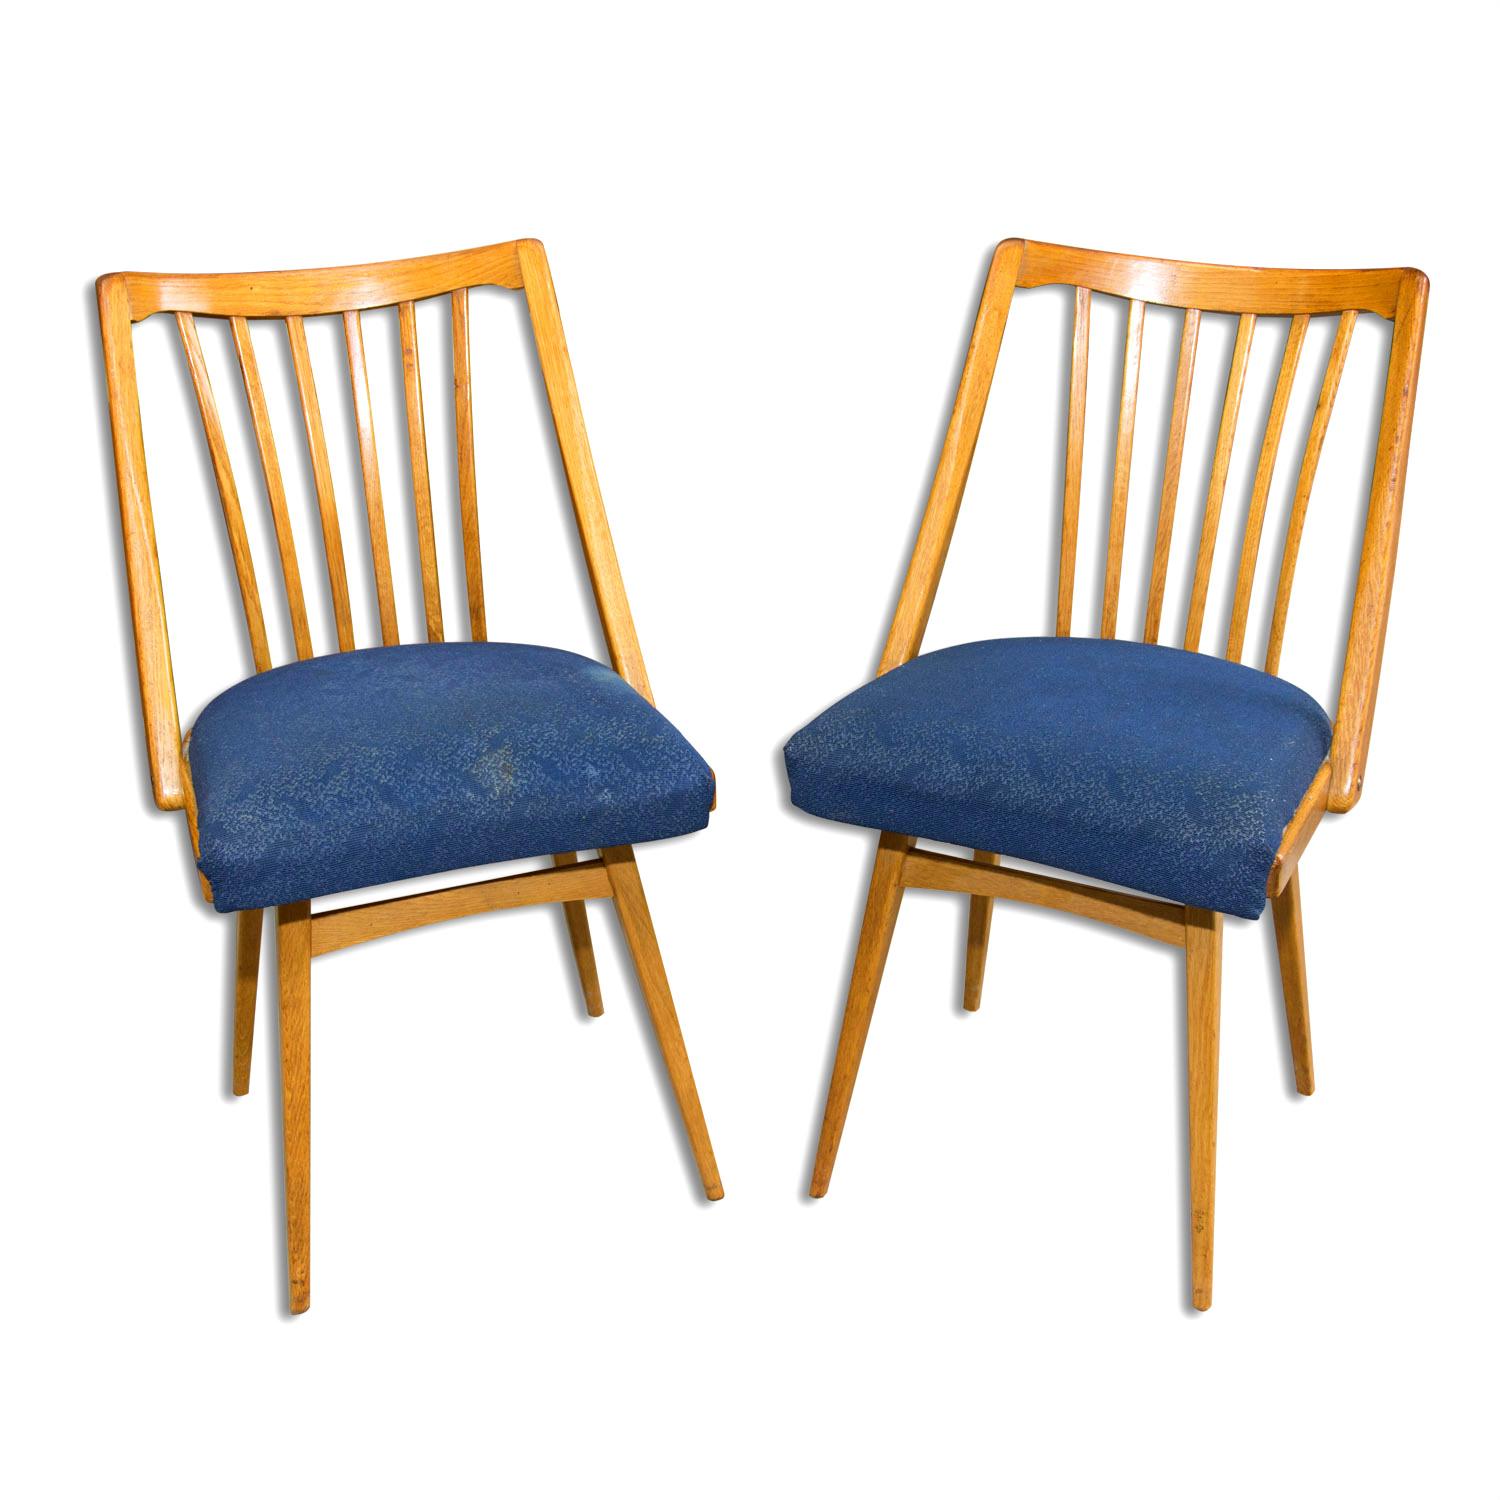 Pair of dining chairs from the 1960´s, made in Czechoslovakia, designed by Antonín Šuman. Beech bentwood construction.

In good Vintage condition, the fabric shows signs of age and using. Price is for the pair.

Measures: Height: 79 cm

seat: